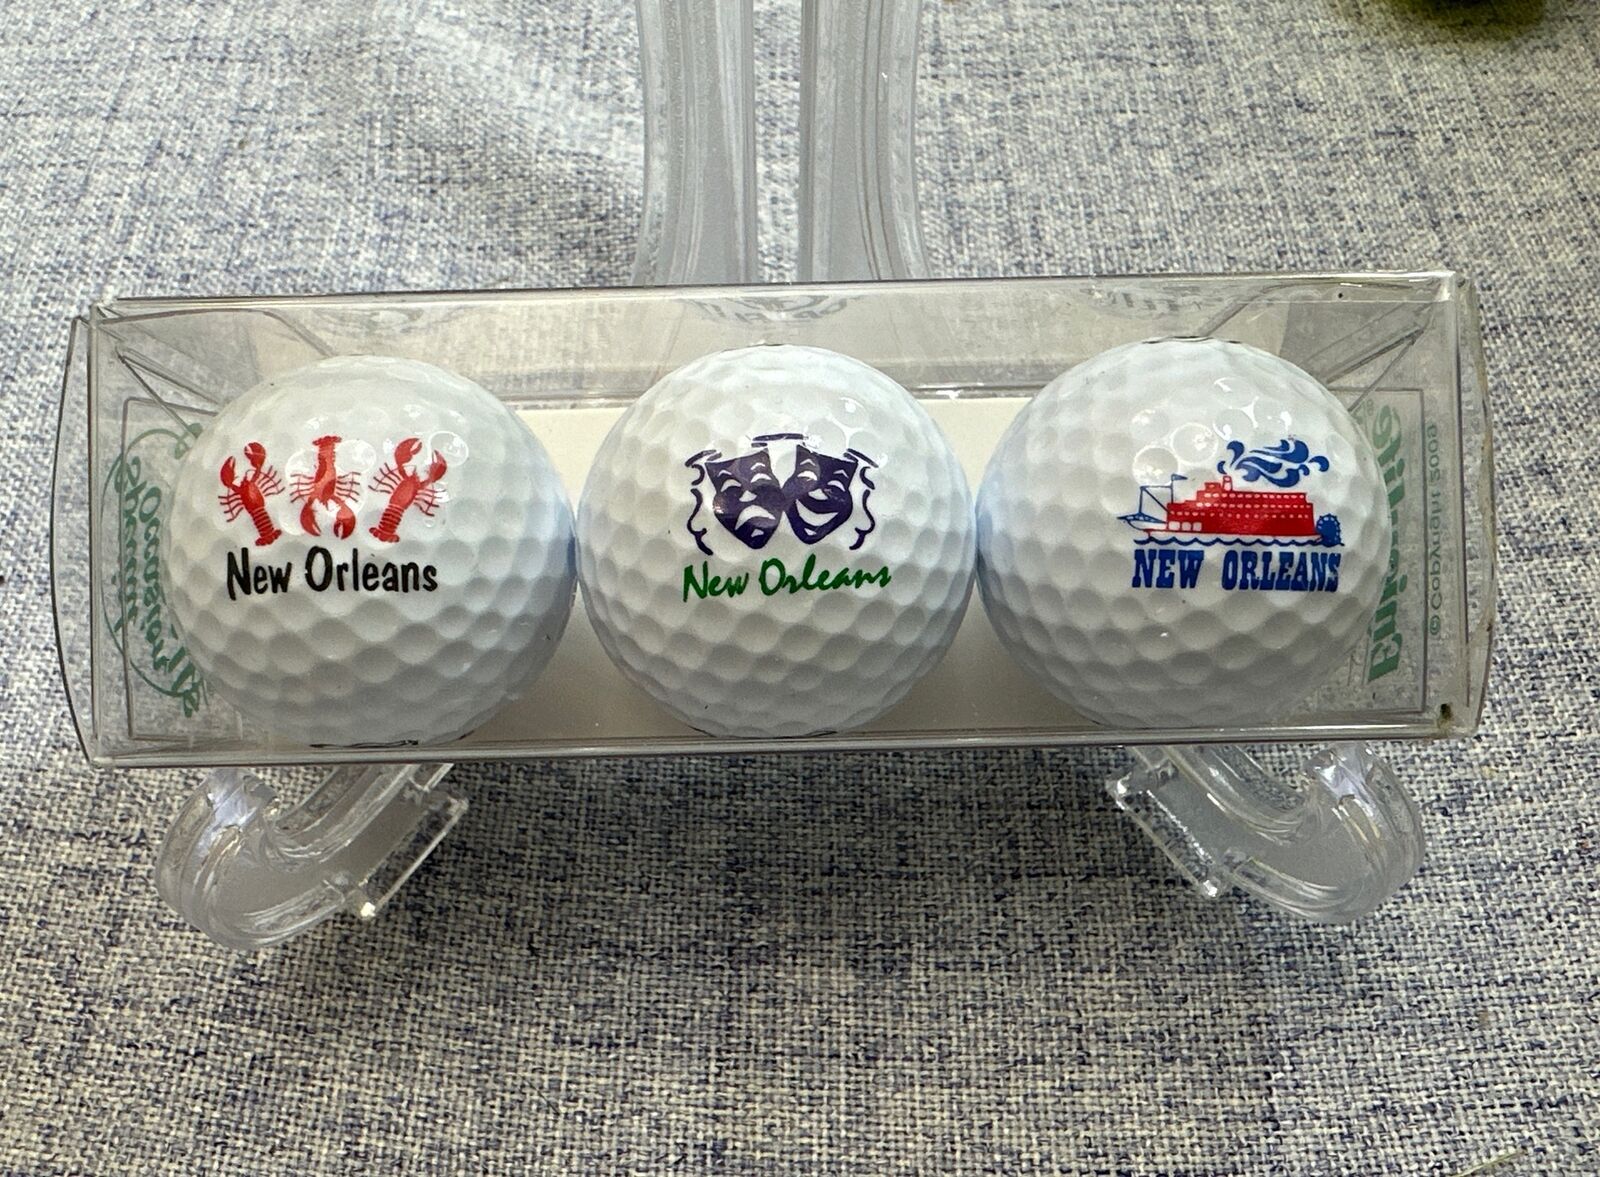 Golf Balls Enjoy Life Special Occasion New Orleans Crawfish MardiGras Steamboat